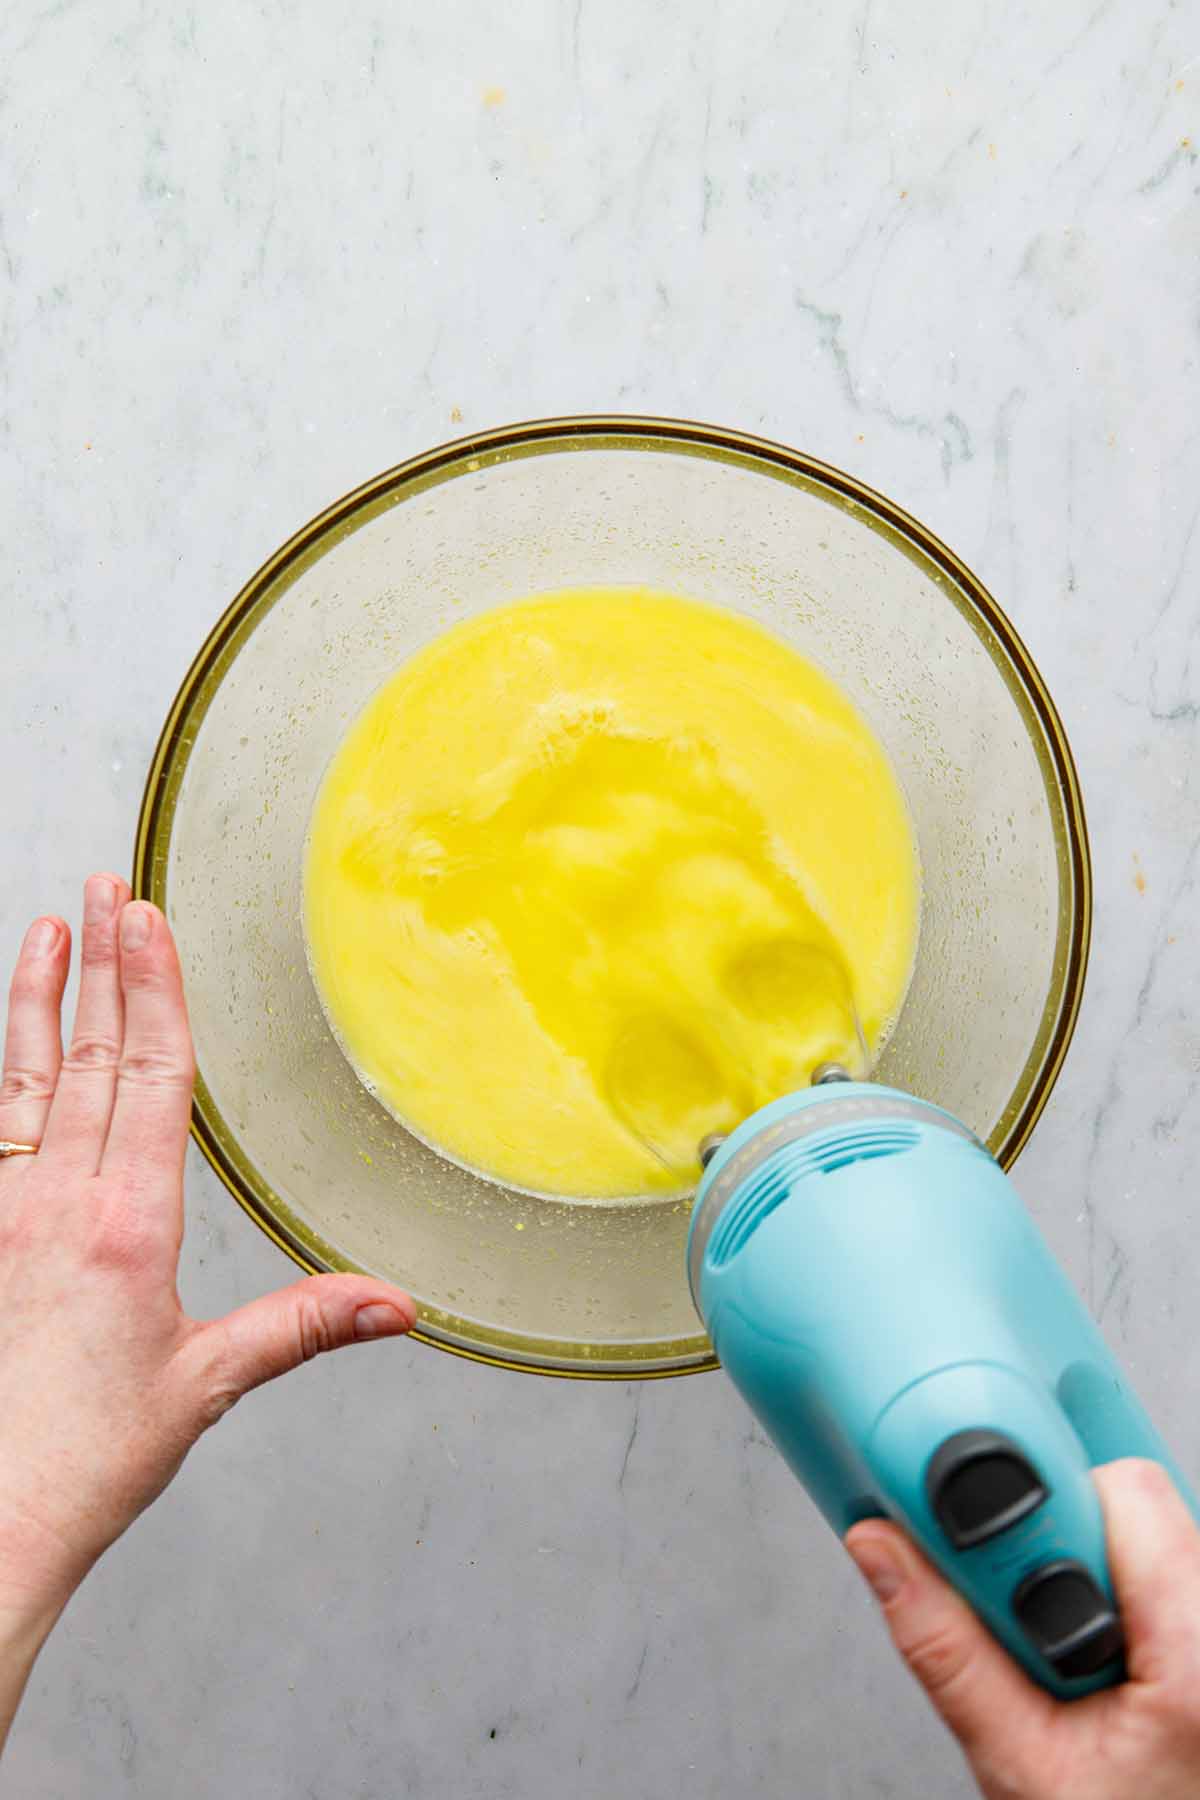 A hand holding a hand mixer and mixing ingredients in a bowl.